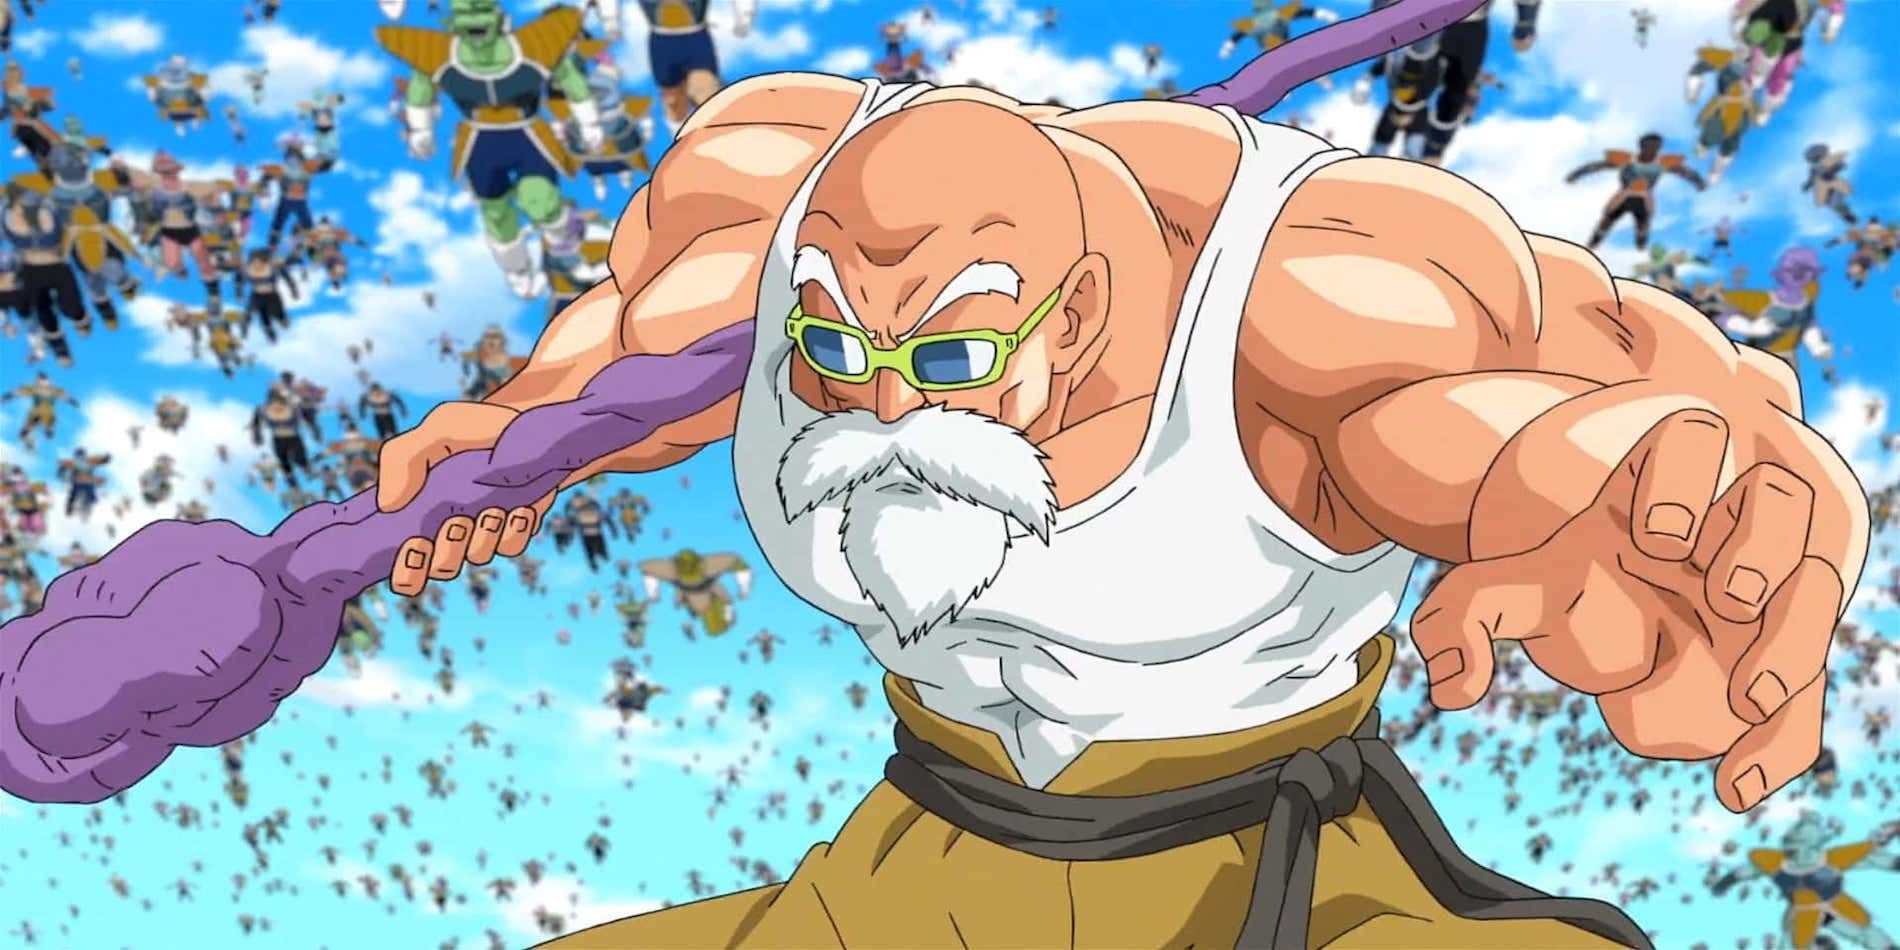 Master Roshi battles Frieza's forces in Dragon Ball Z Resurrection F